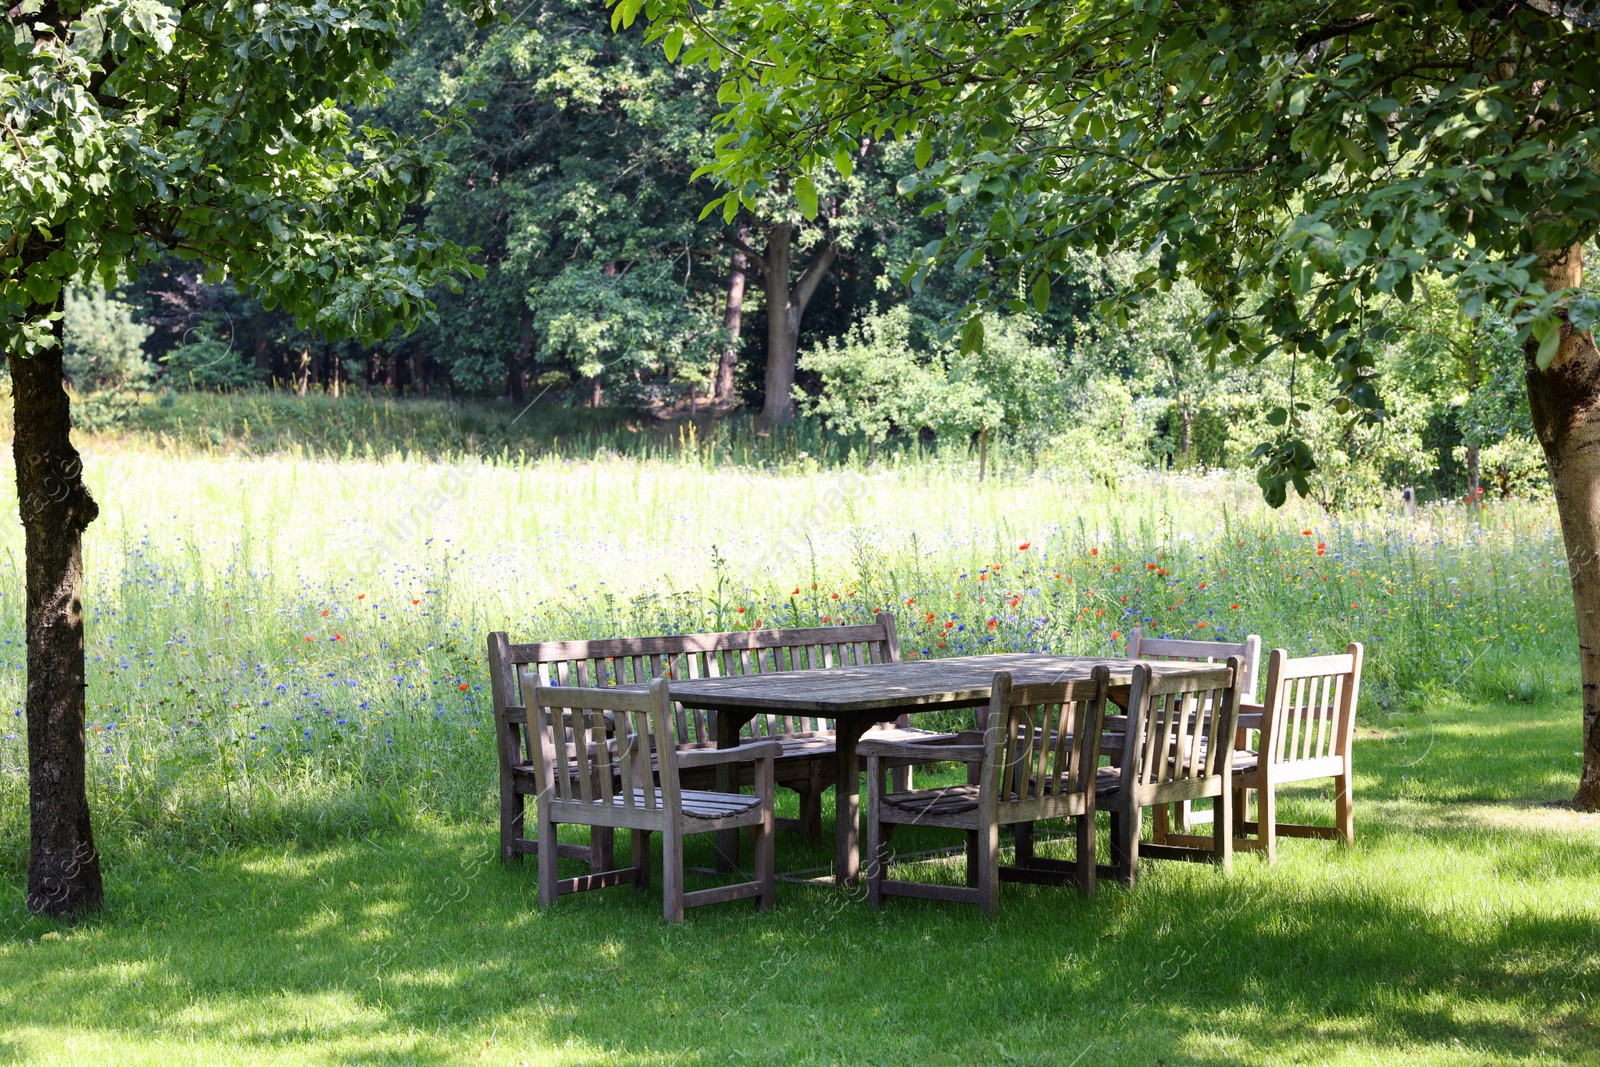 Photo of Empty wooden table with bench and chairs in garden